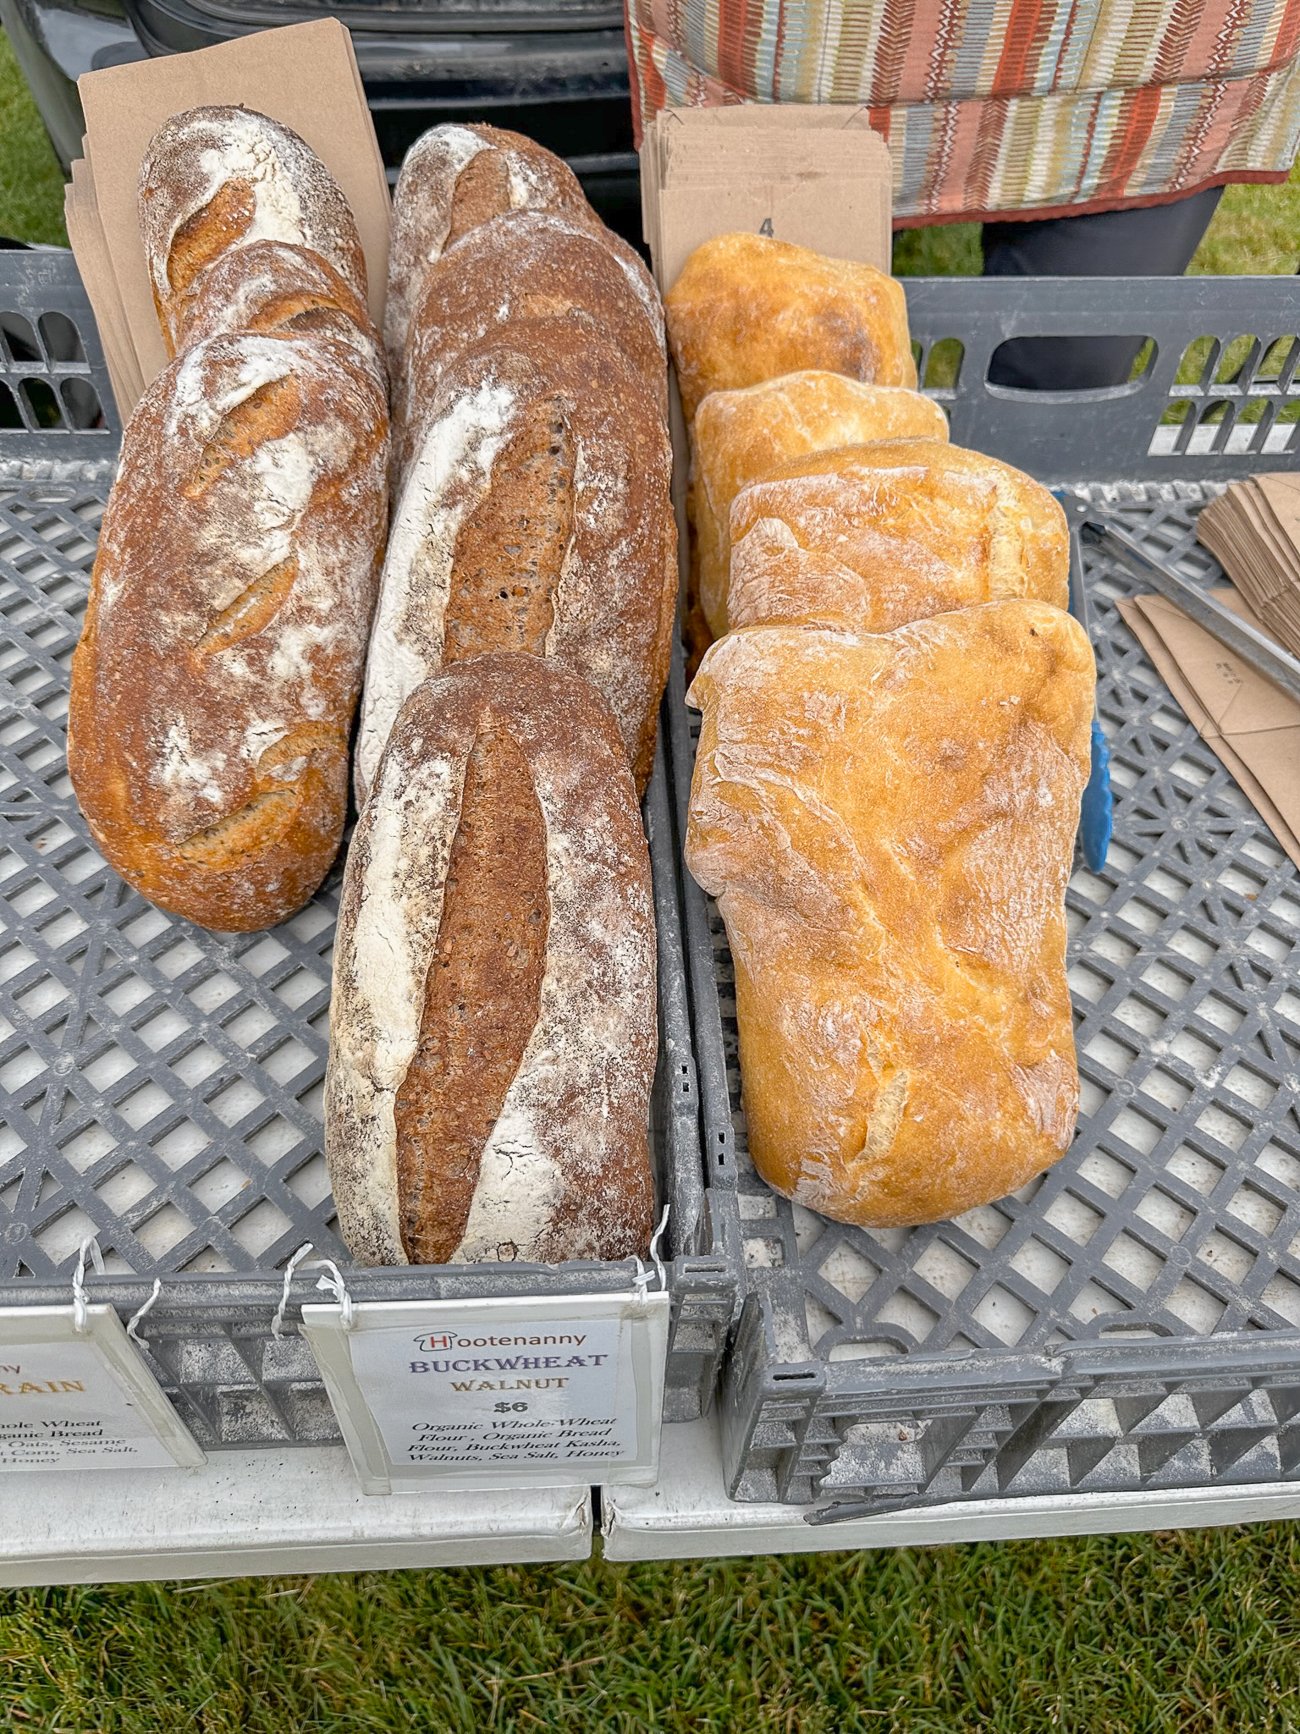 Loaves of freshly baked bread at the Boothbay Harbor farmer's market